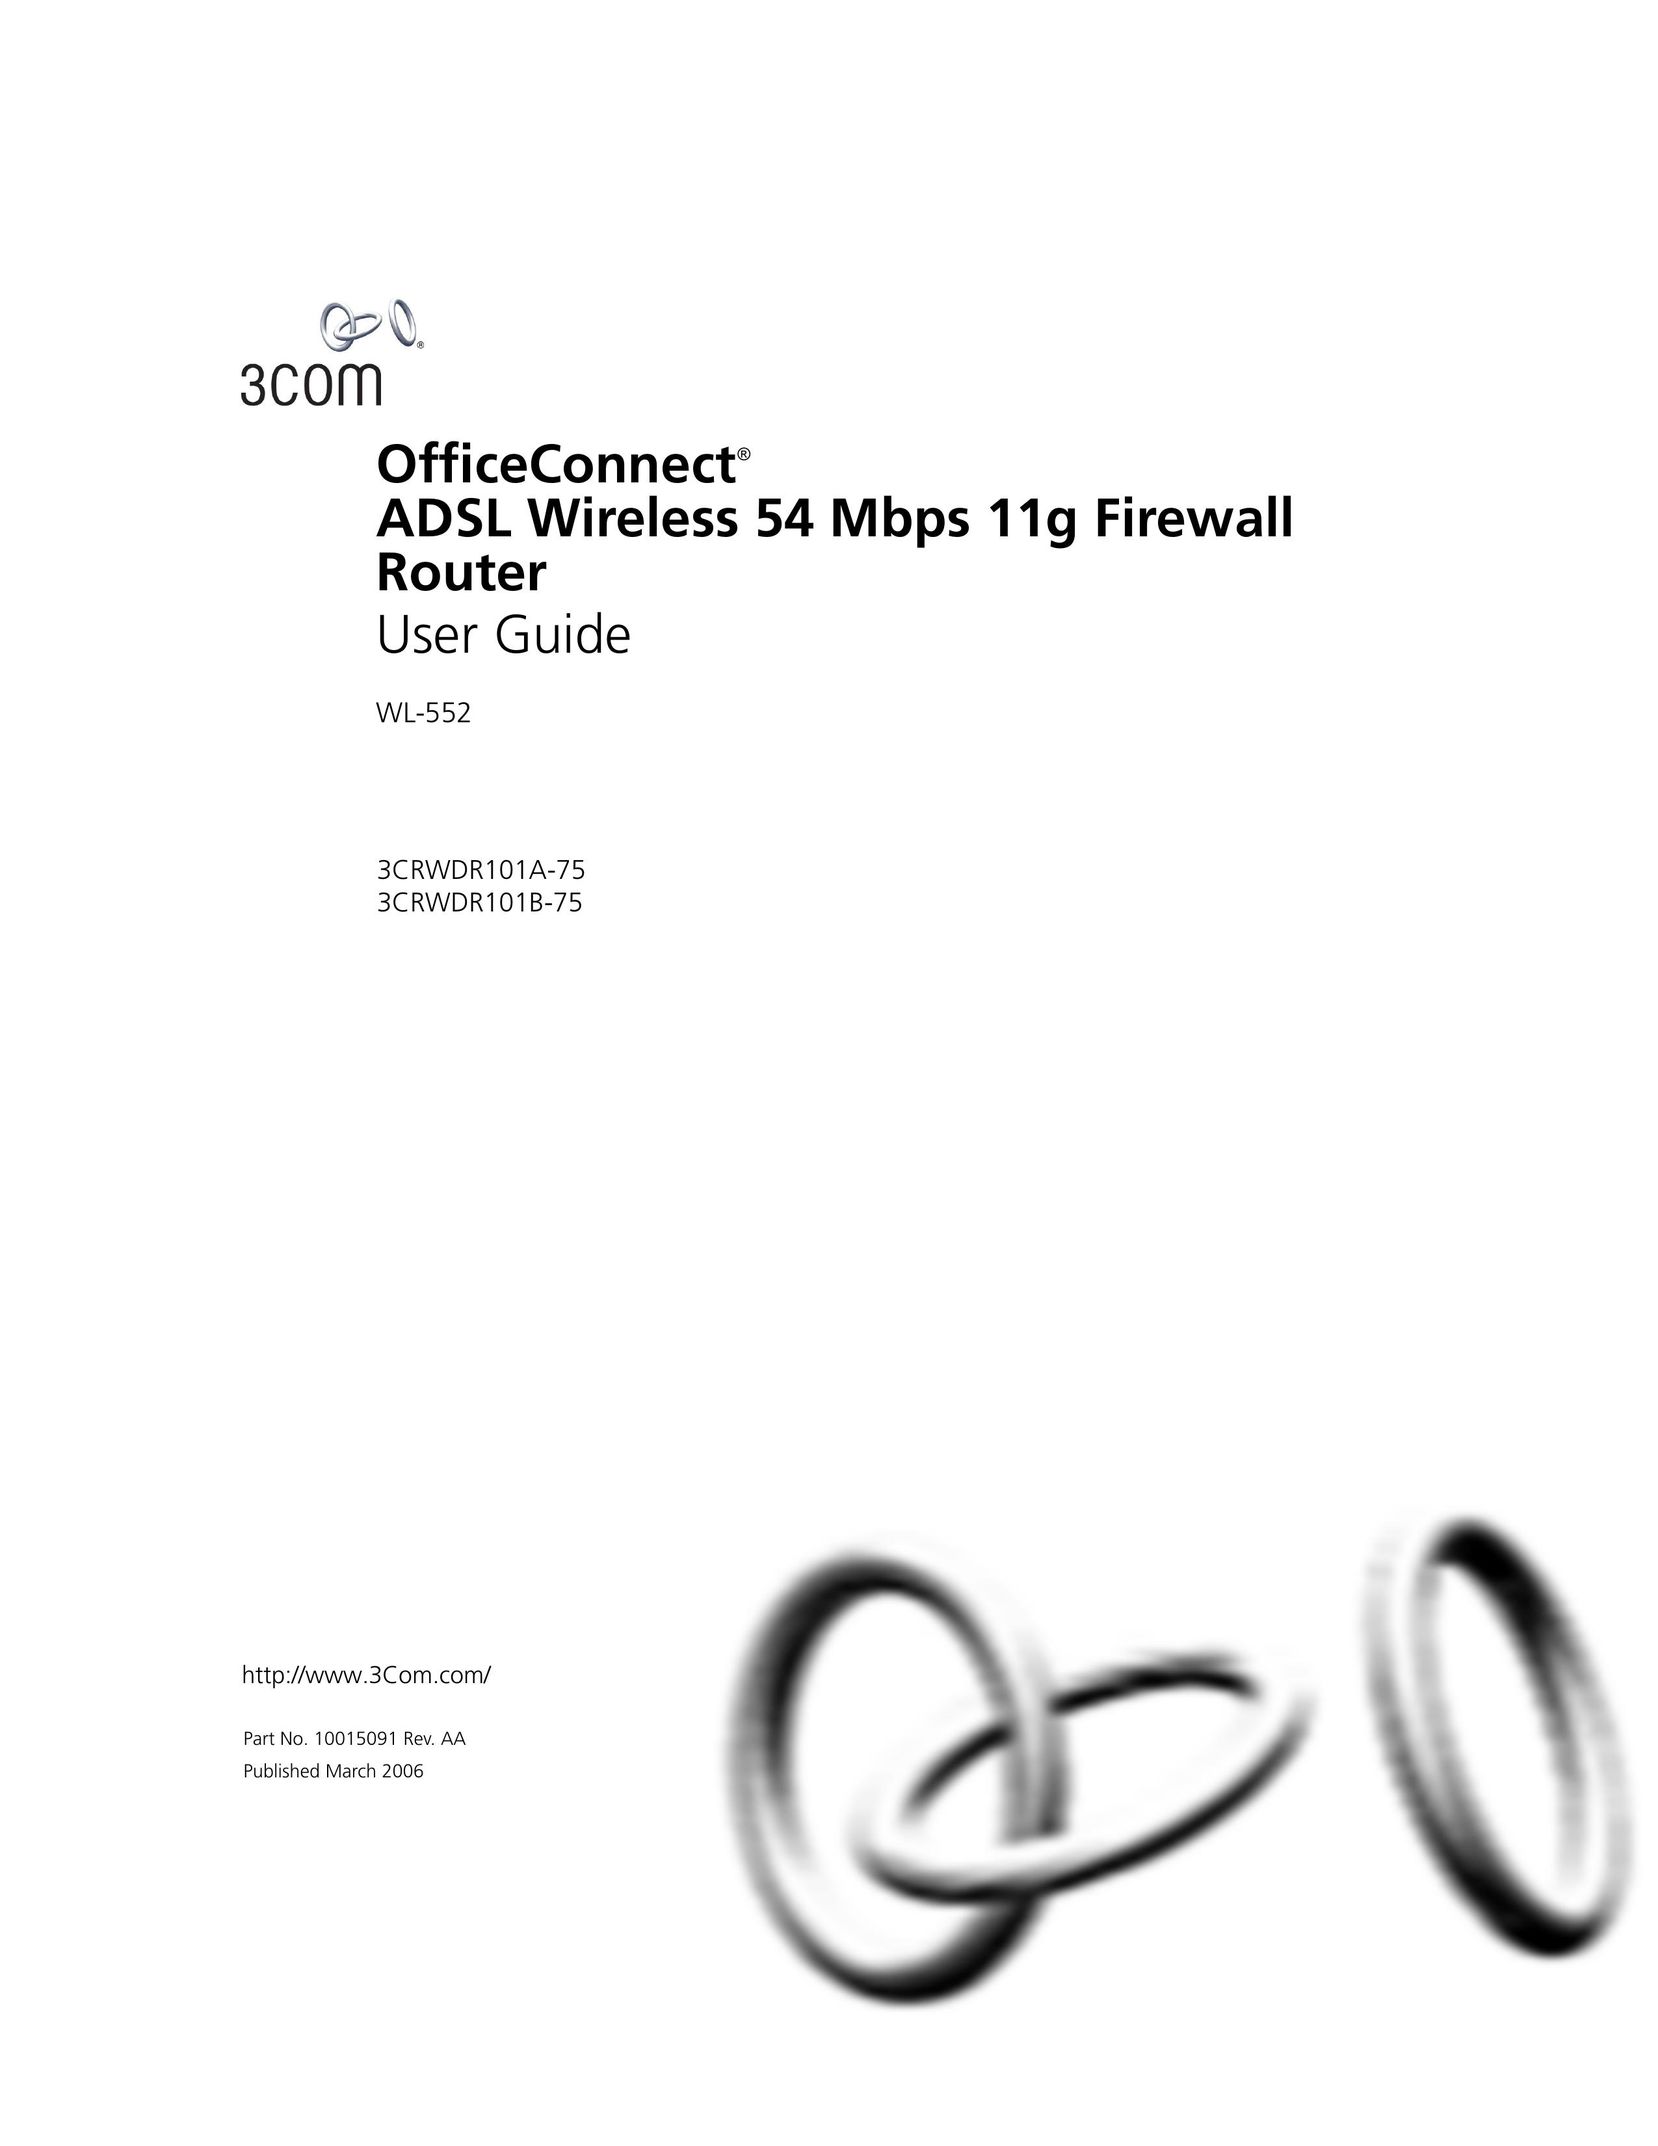 3Com 3CRWDR101B-75 Network Router User Manual